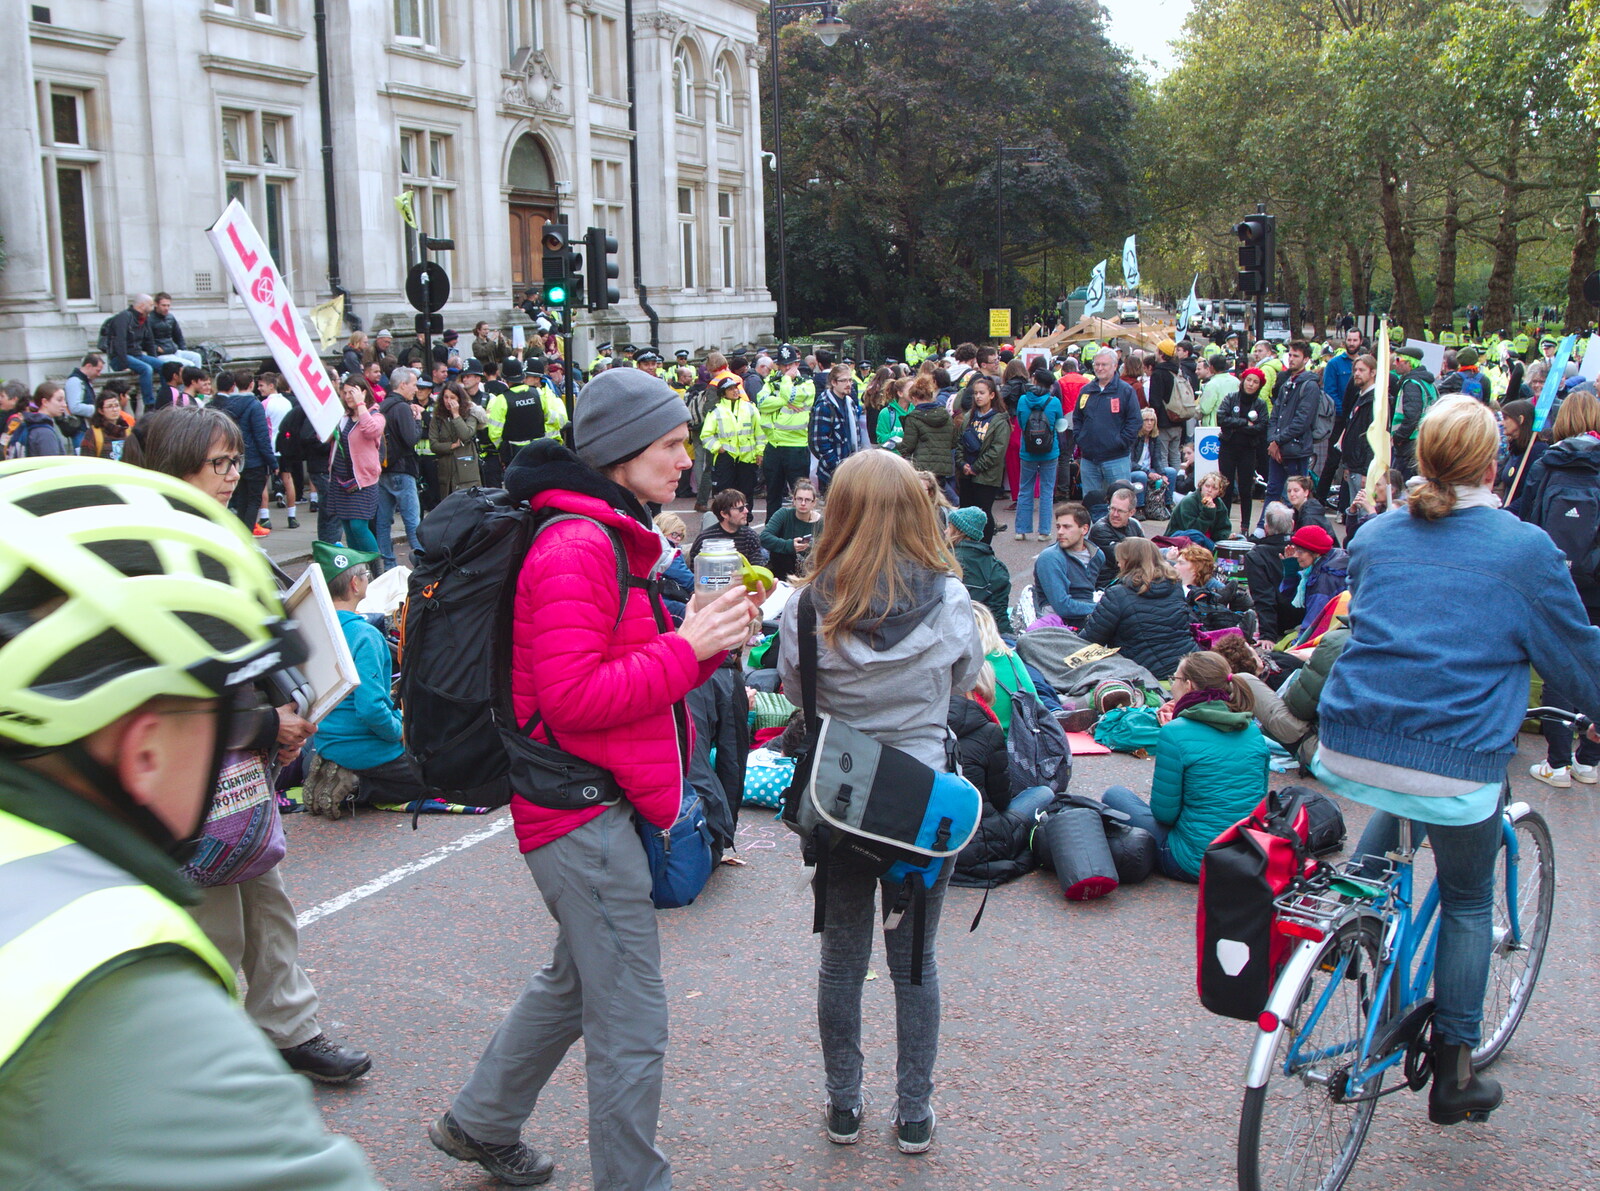 A big sit-in occurs on Horseguard's Parade from The Extinction Rebellion Protest, Westminster, London - 9th October 2019